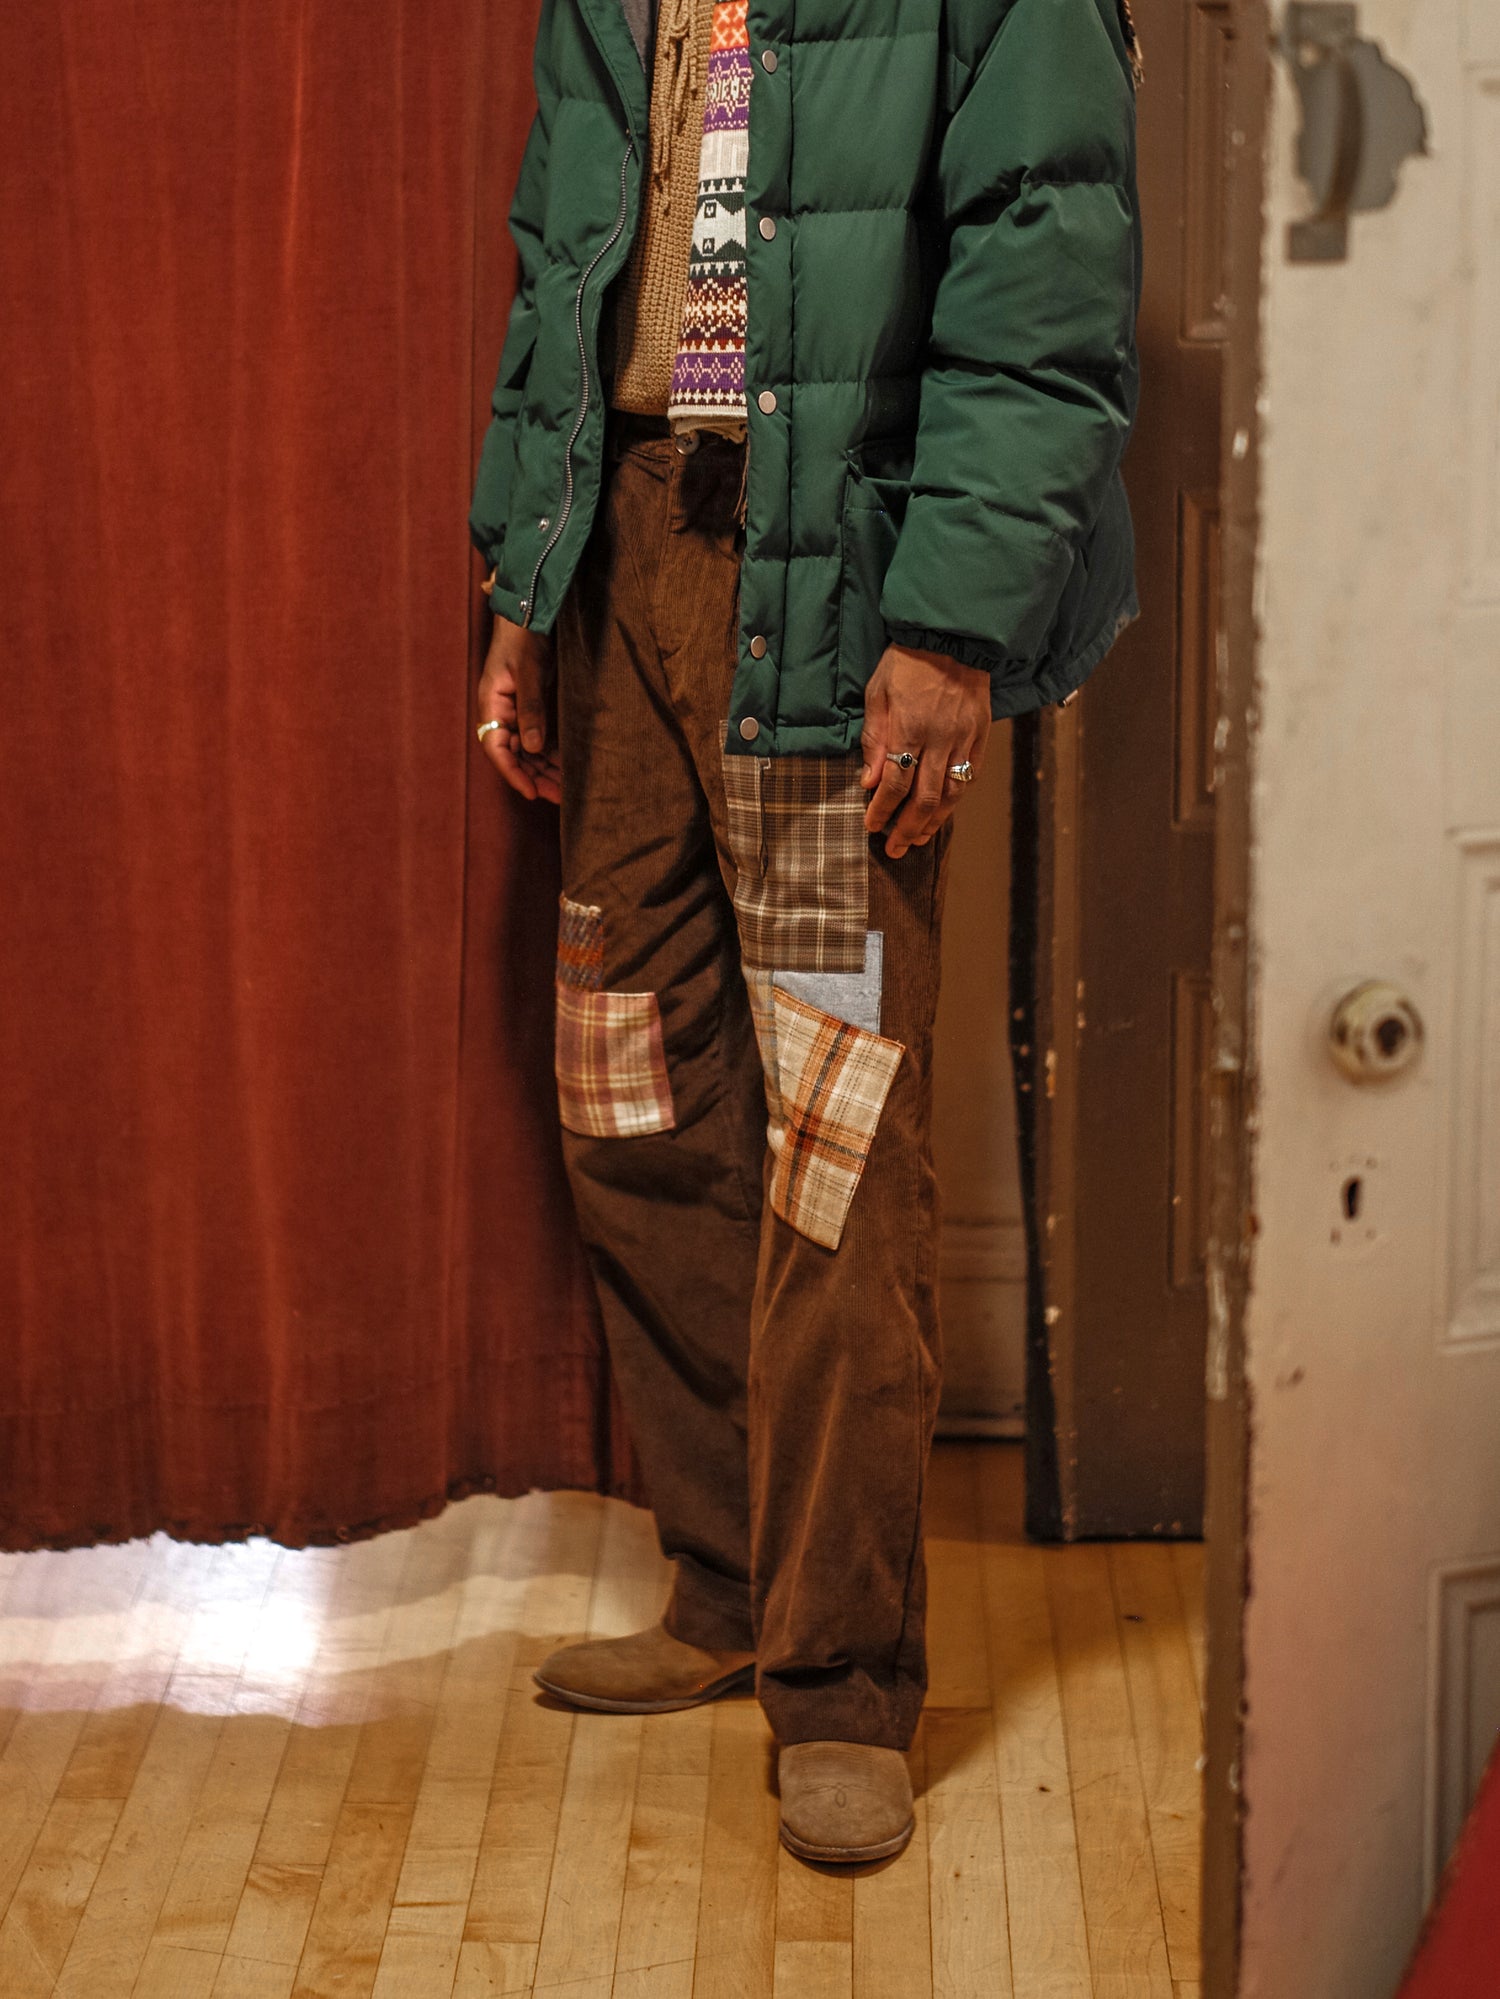 A man in a green jacket, wearing Found Multi-Plaid Patch Corduroy Pants, standing next to a door.